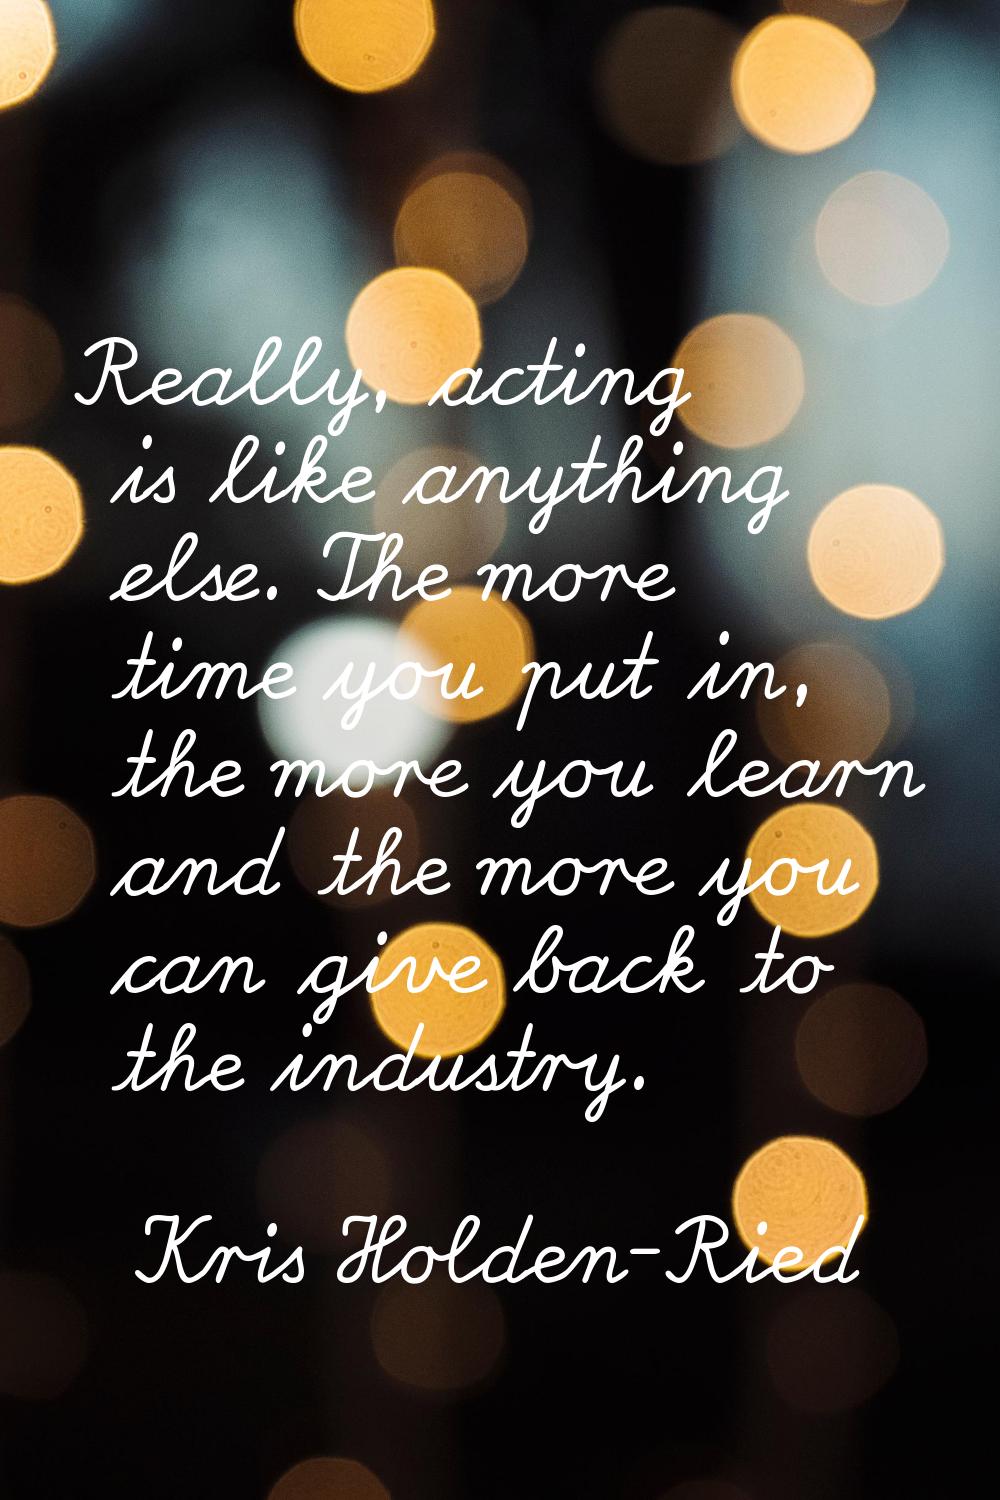 Really, acting is like anything else. The more time you put in, the more you learn and the more you